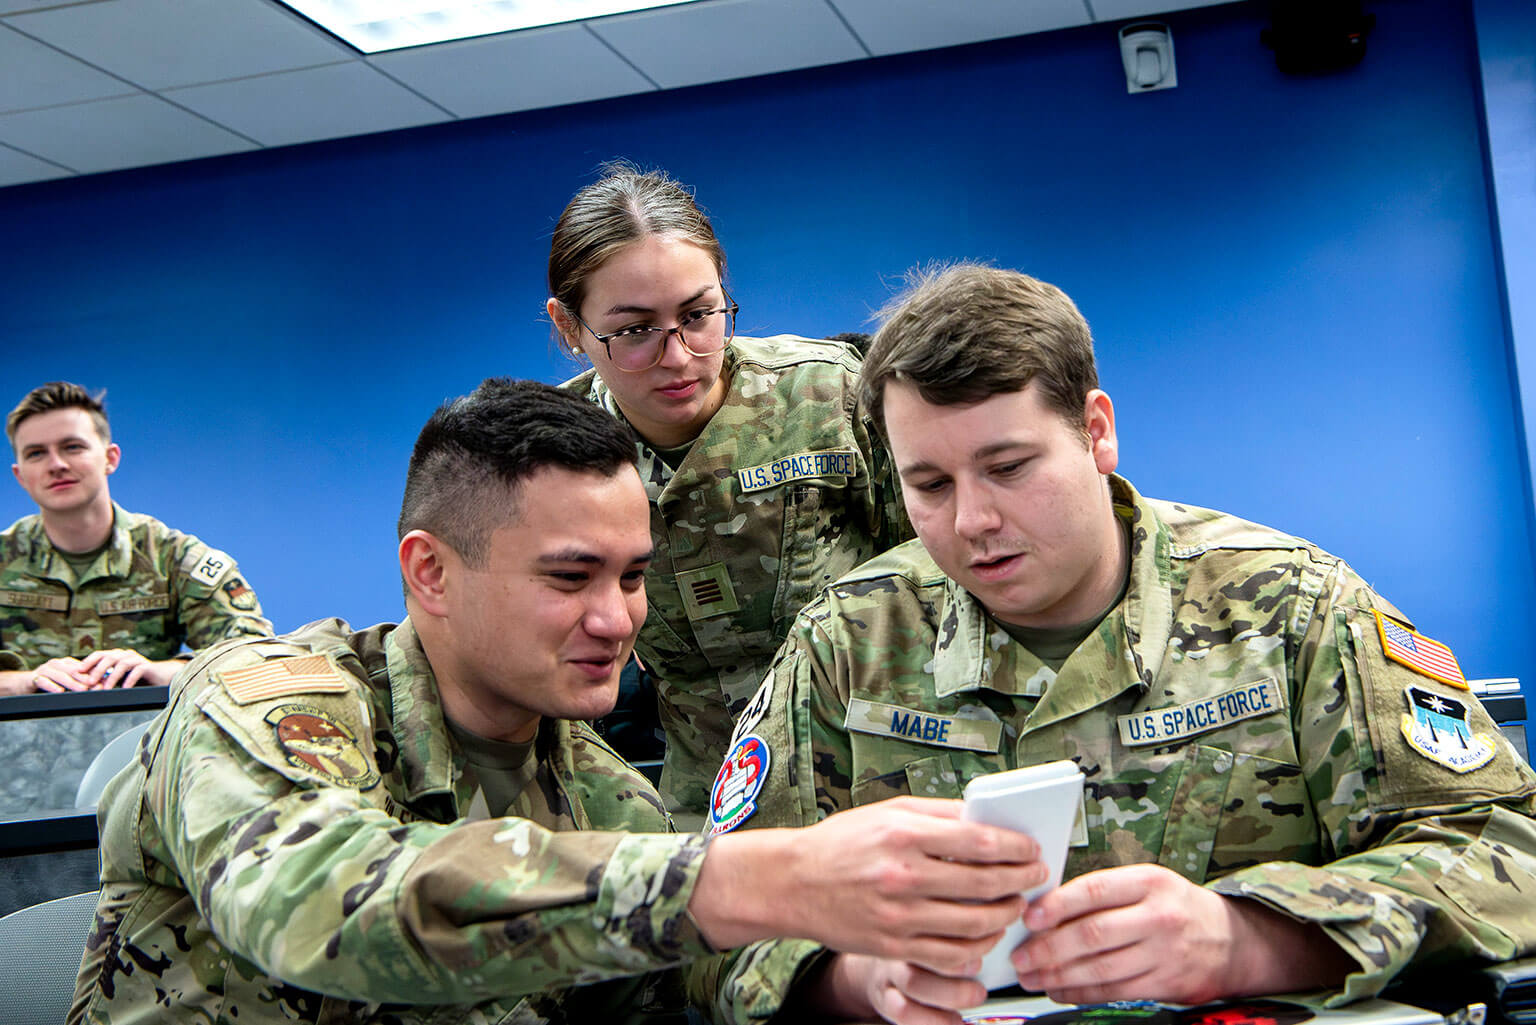 Cadets 1st Class Christopher Lindley, left, Trevin Mabe, and Isiskyra Budd watch an exercise on market sizing and analysis.